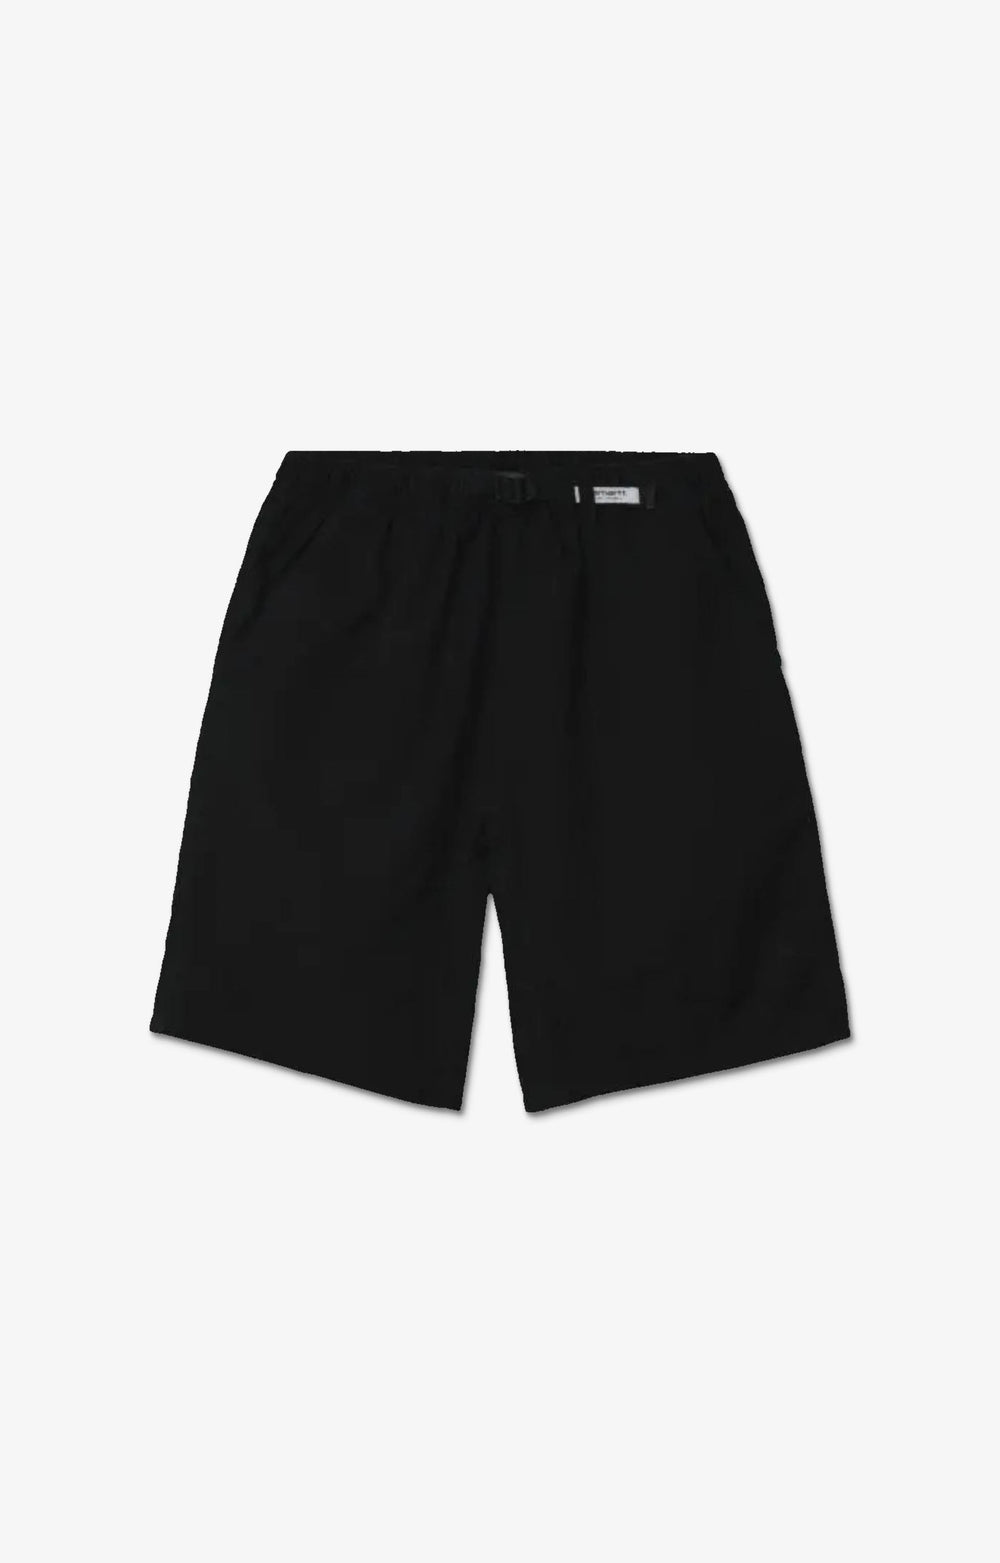 Carhartt WIP Clover Shorts, Black Stone Washed